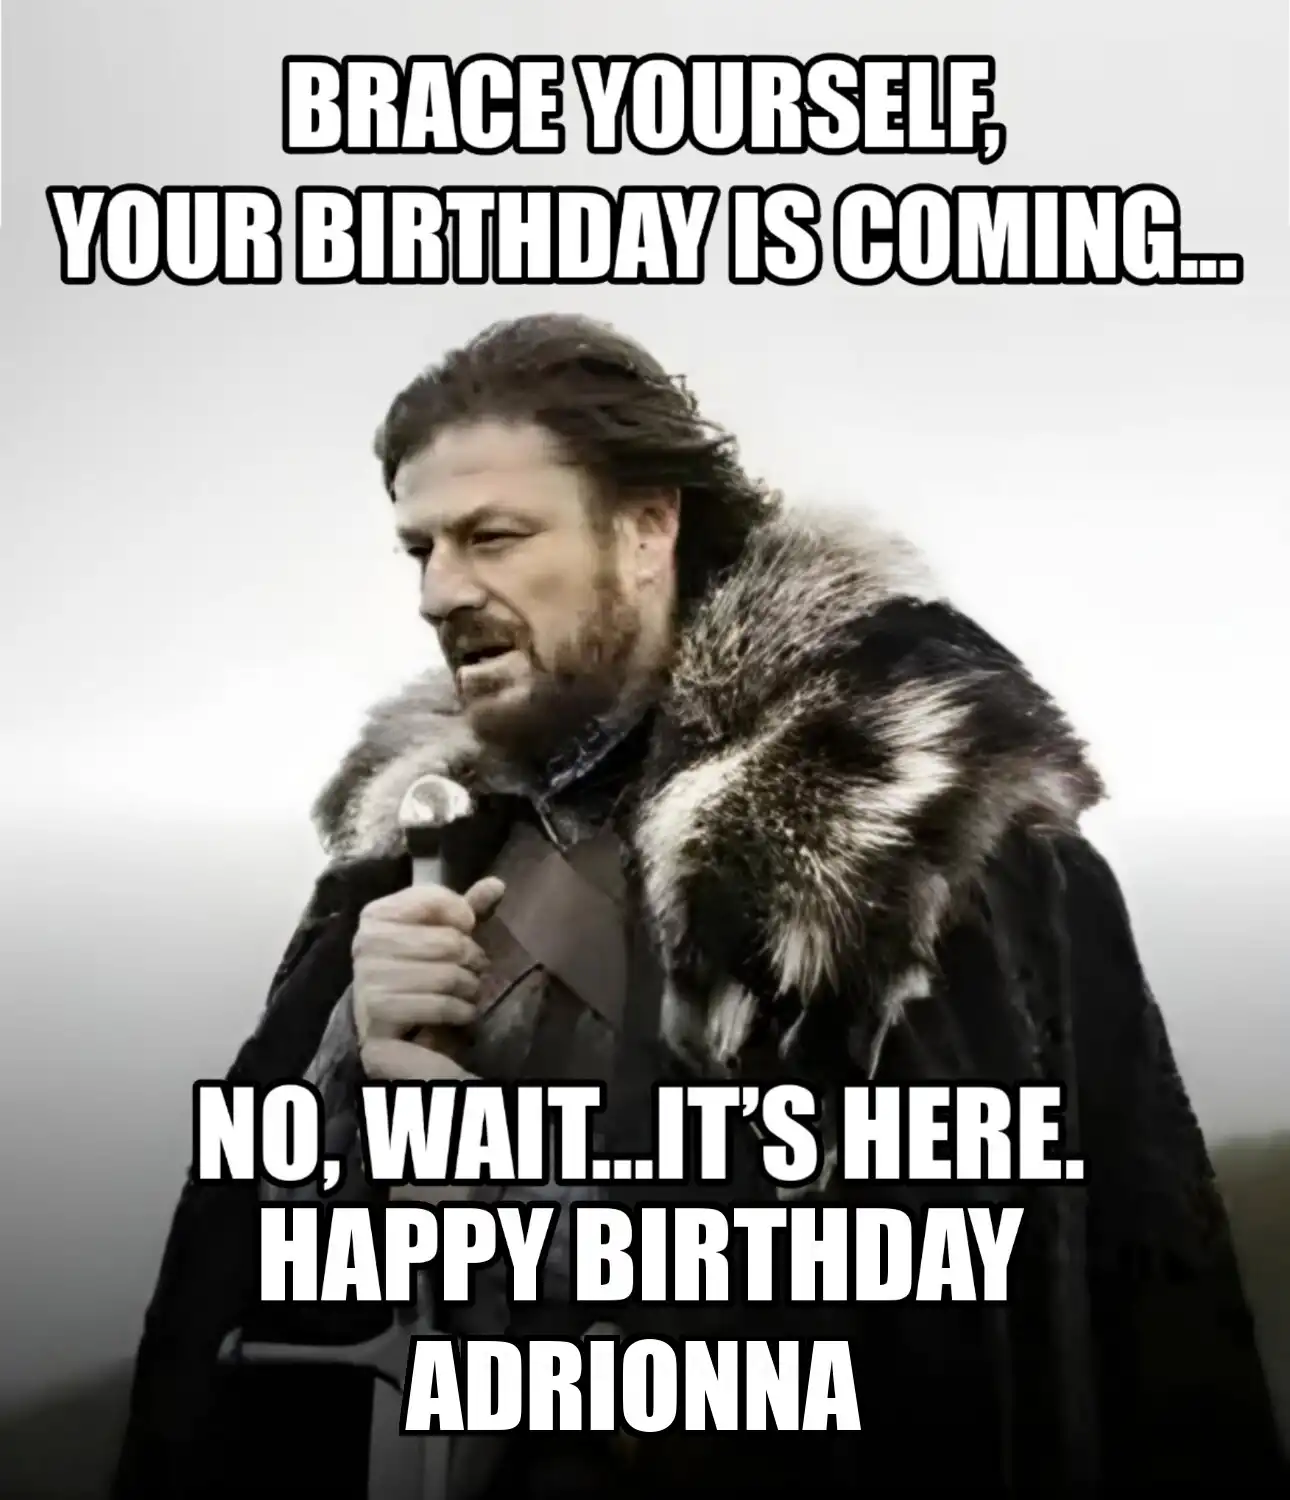 Happy Birthday Adrionna Brace Yourself Your Birthday Is Coming Meme